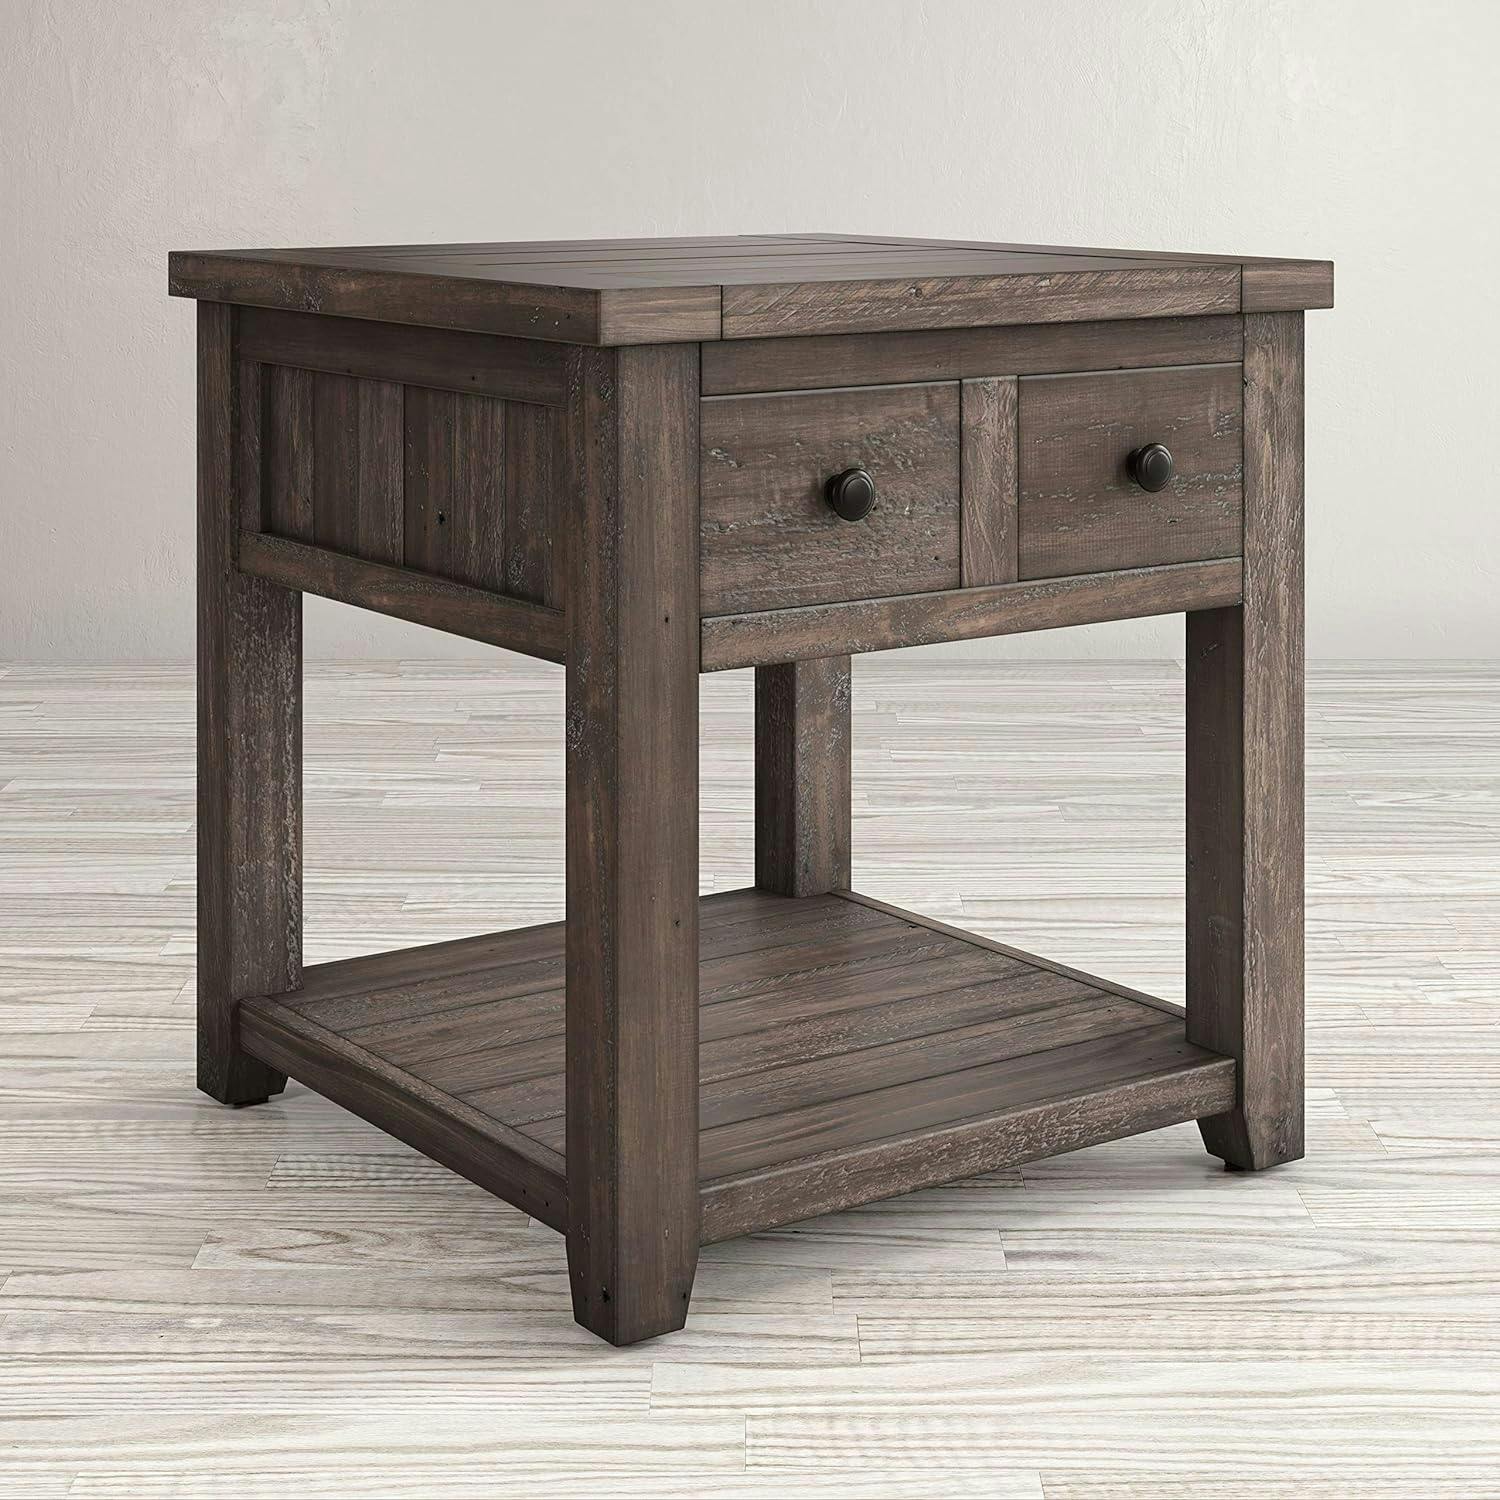 Rustic Reclaimed Pine Square End Table with Storage, Barnwood Brown